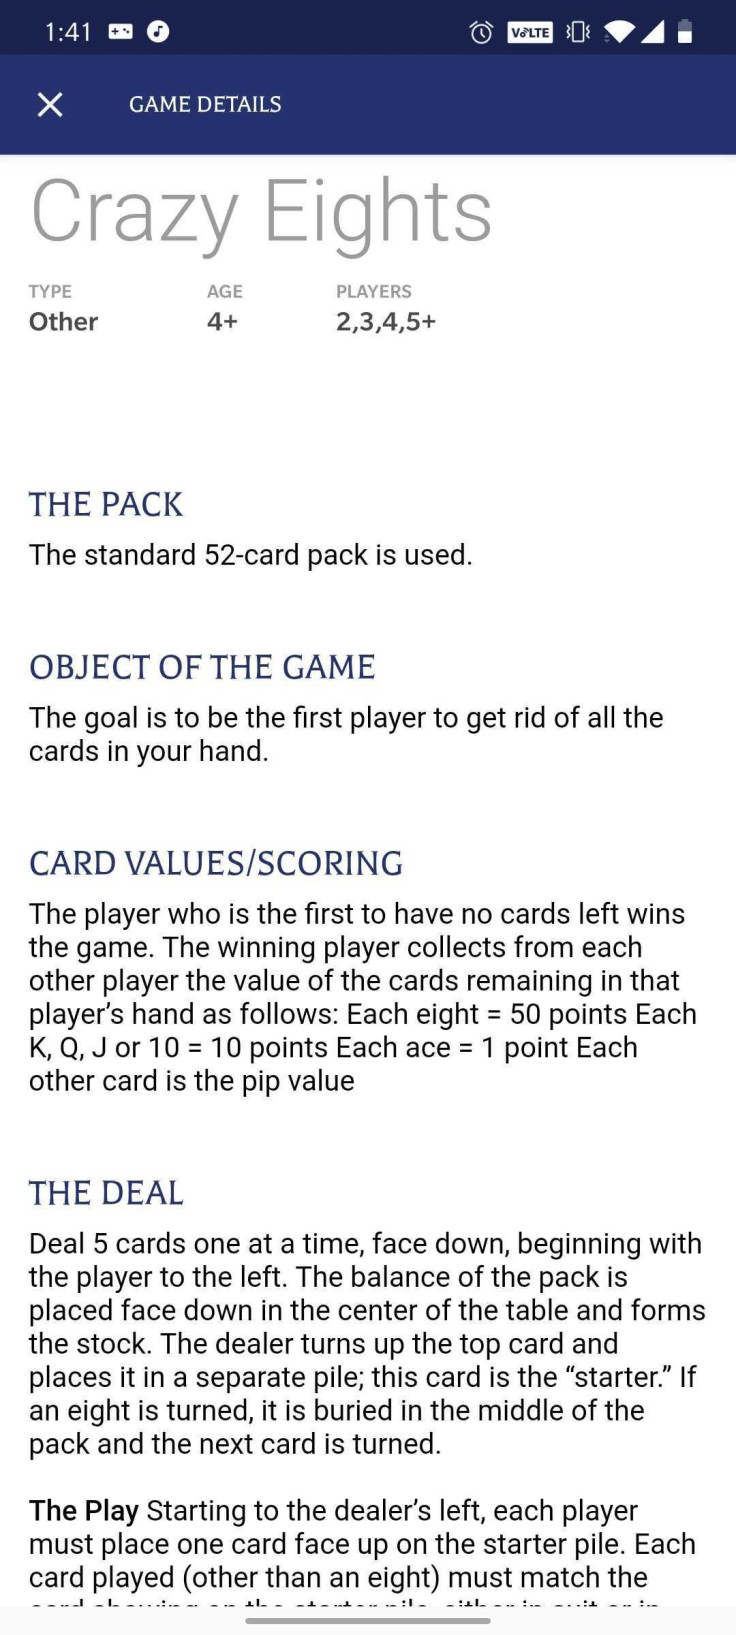 A look at the rules page for Crazy Eights on the Bicycle app